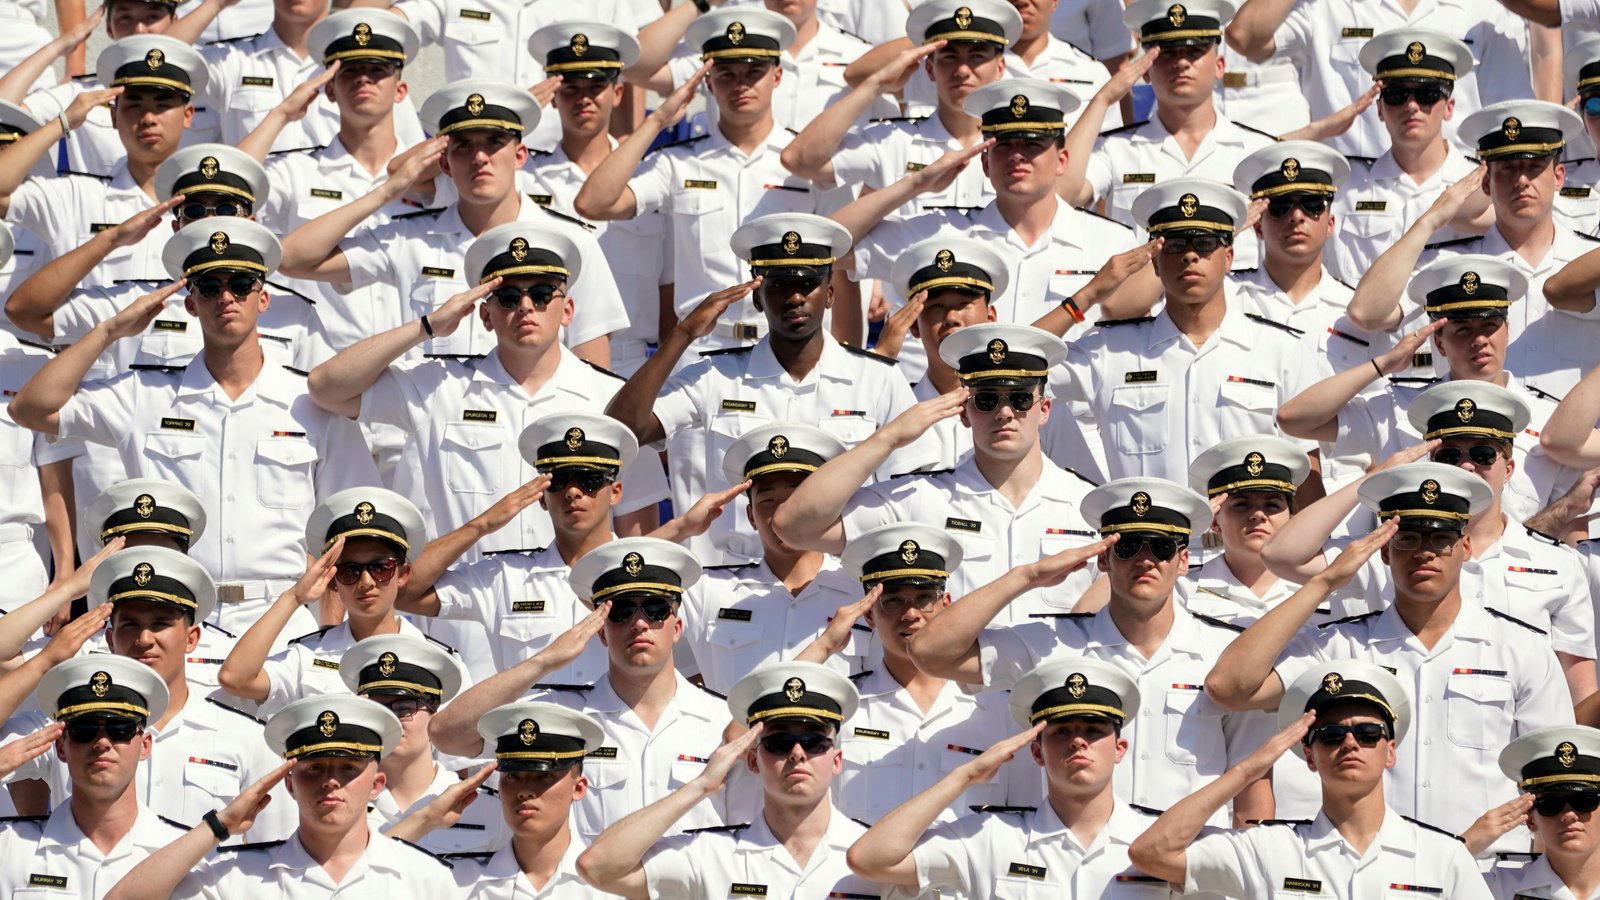 U.S. Navy 2021: The Year in Photos > United States Navy > Detail